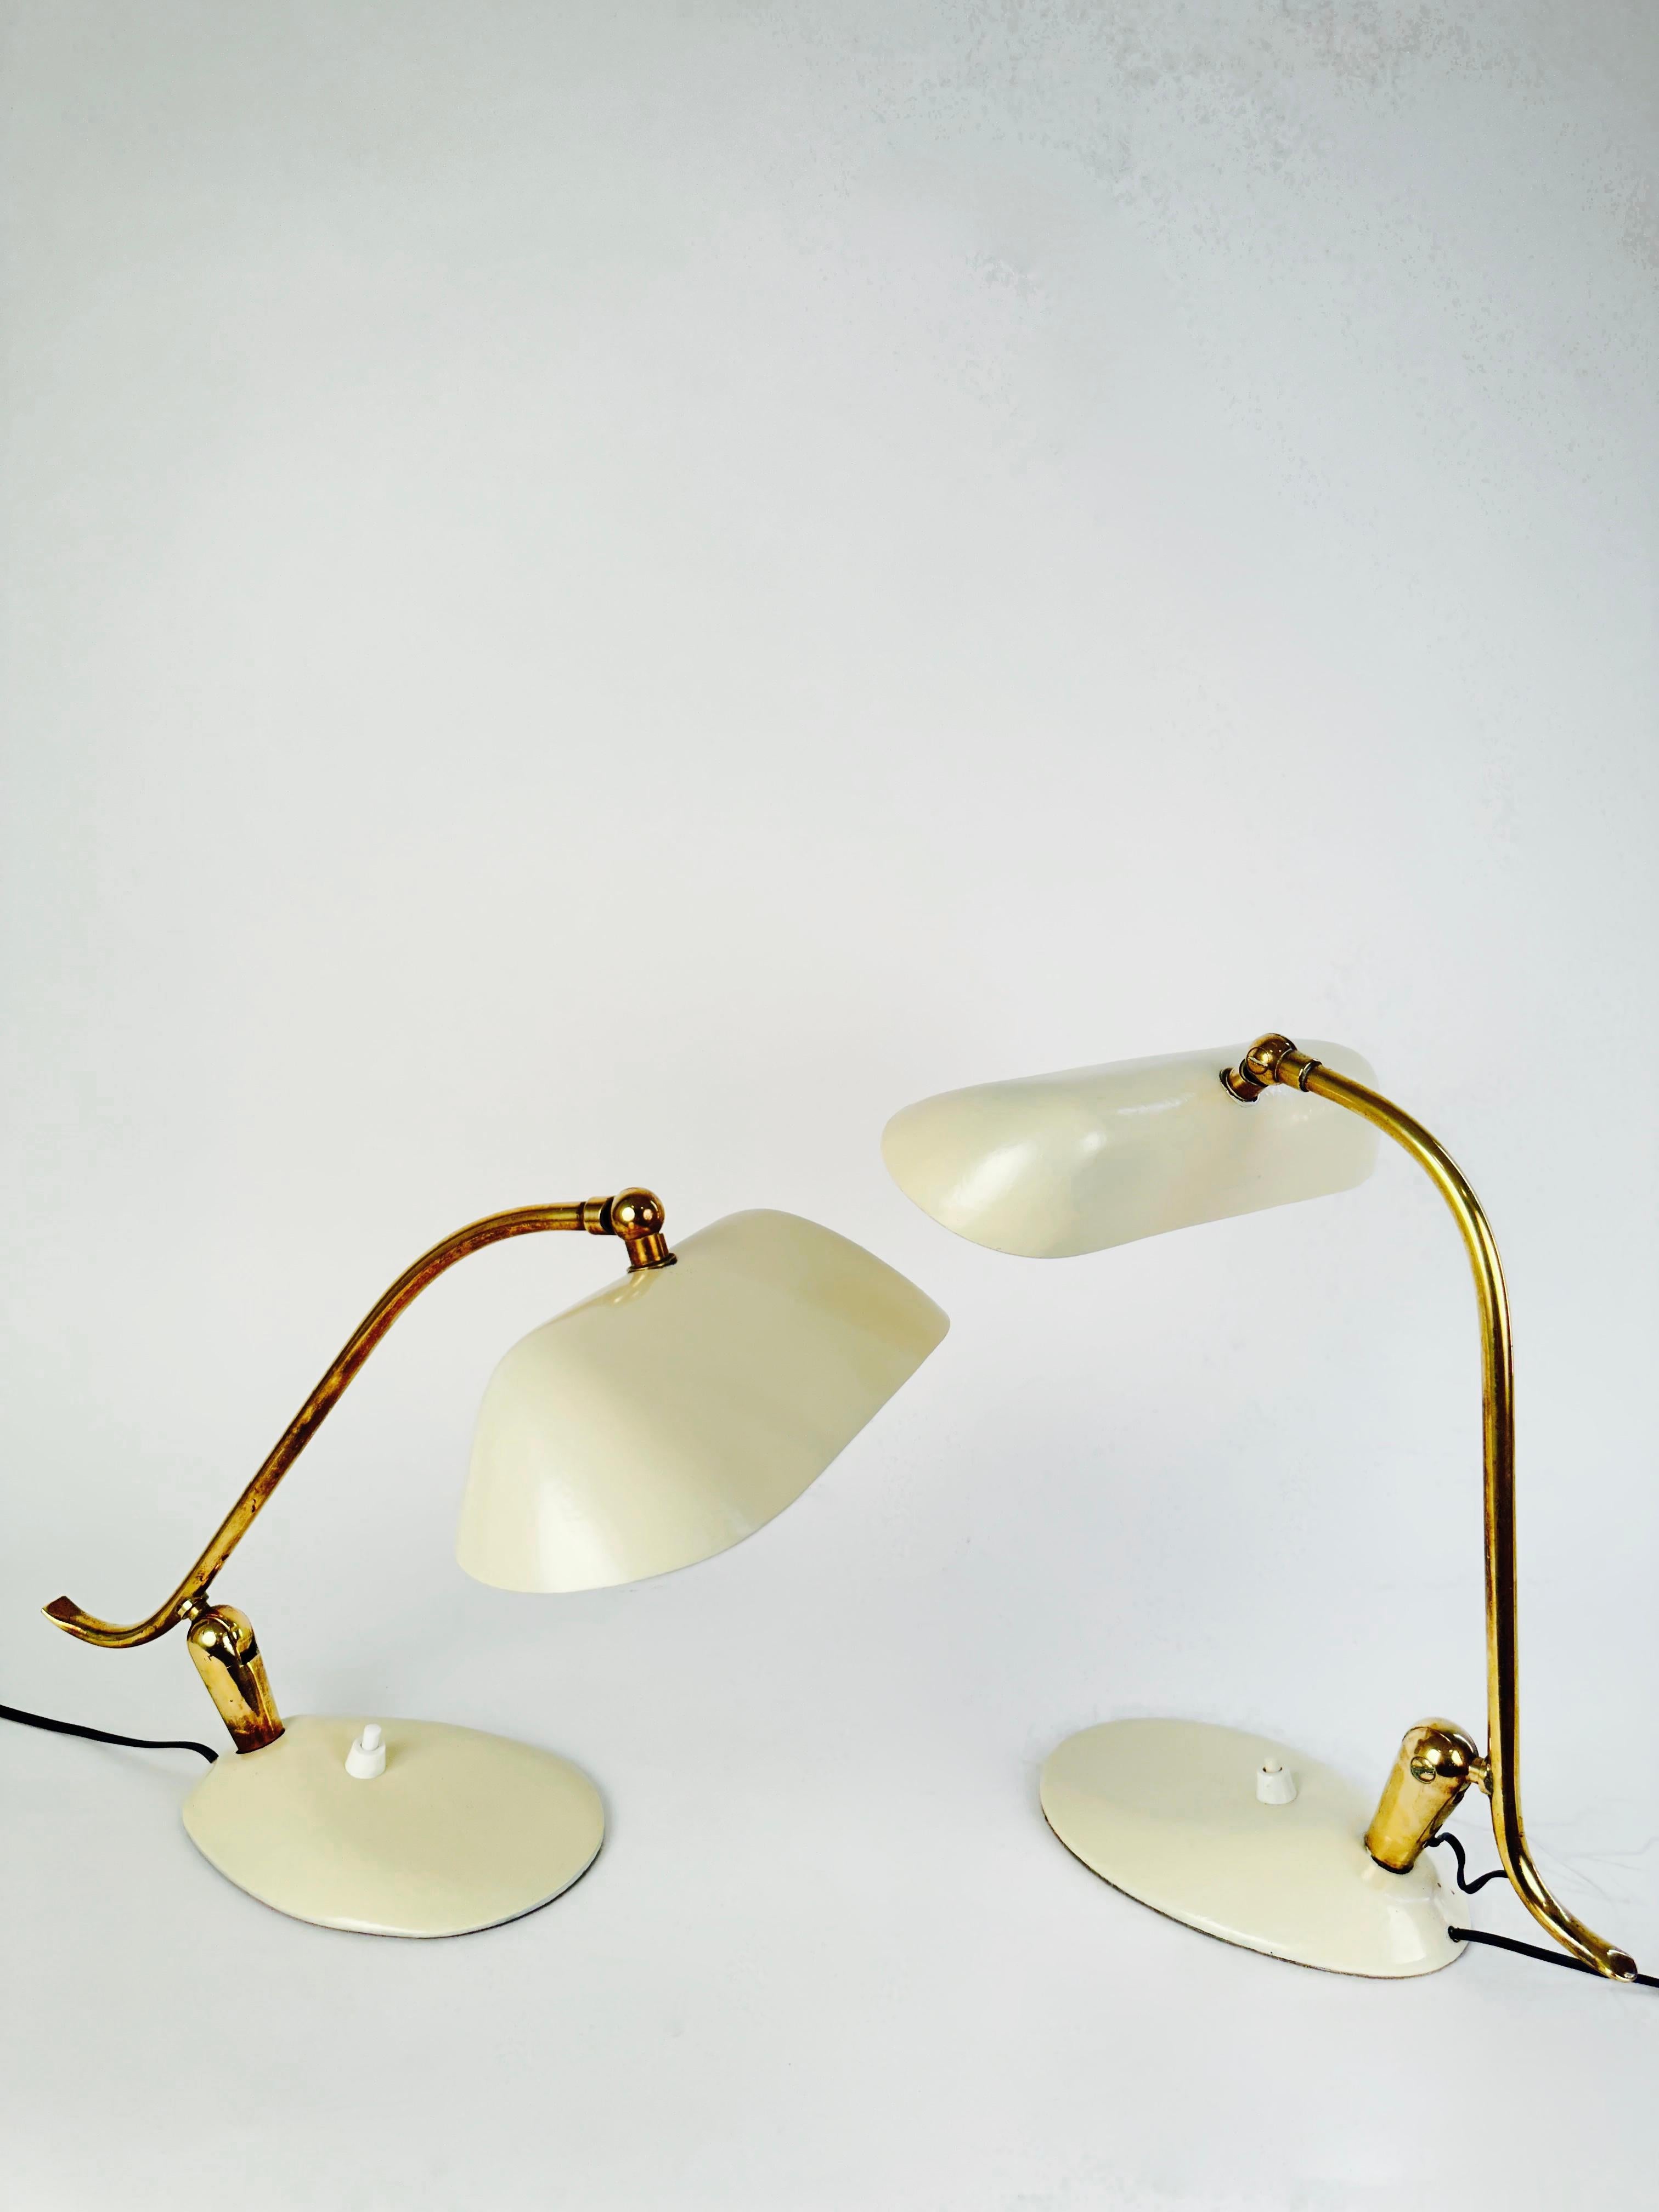 Stilnovo Pair of Table Lamps, Italy, 1950 For Sale 1